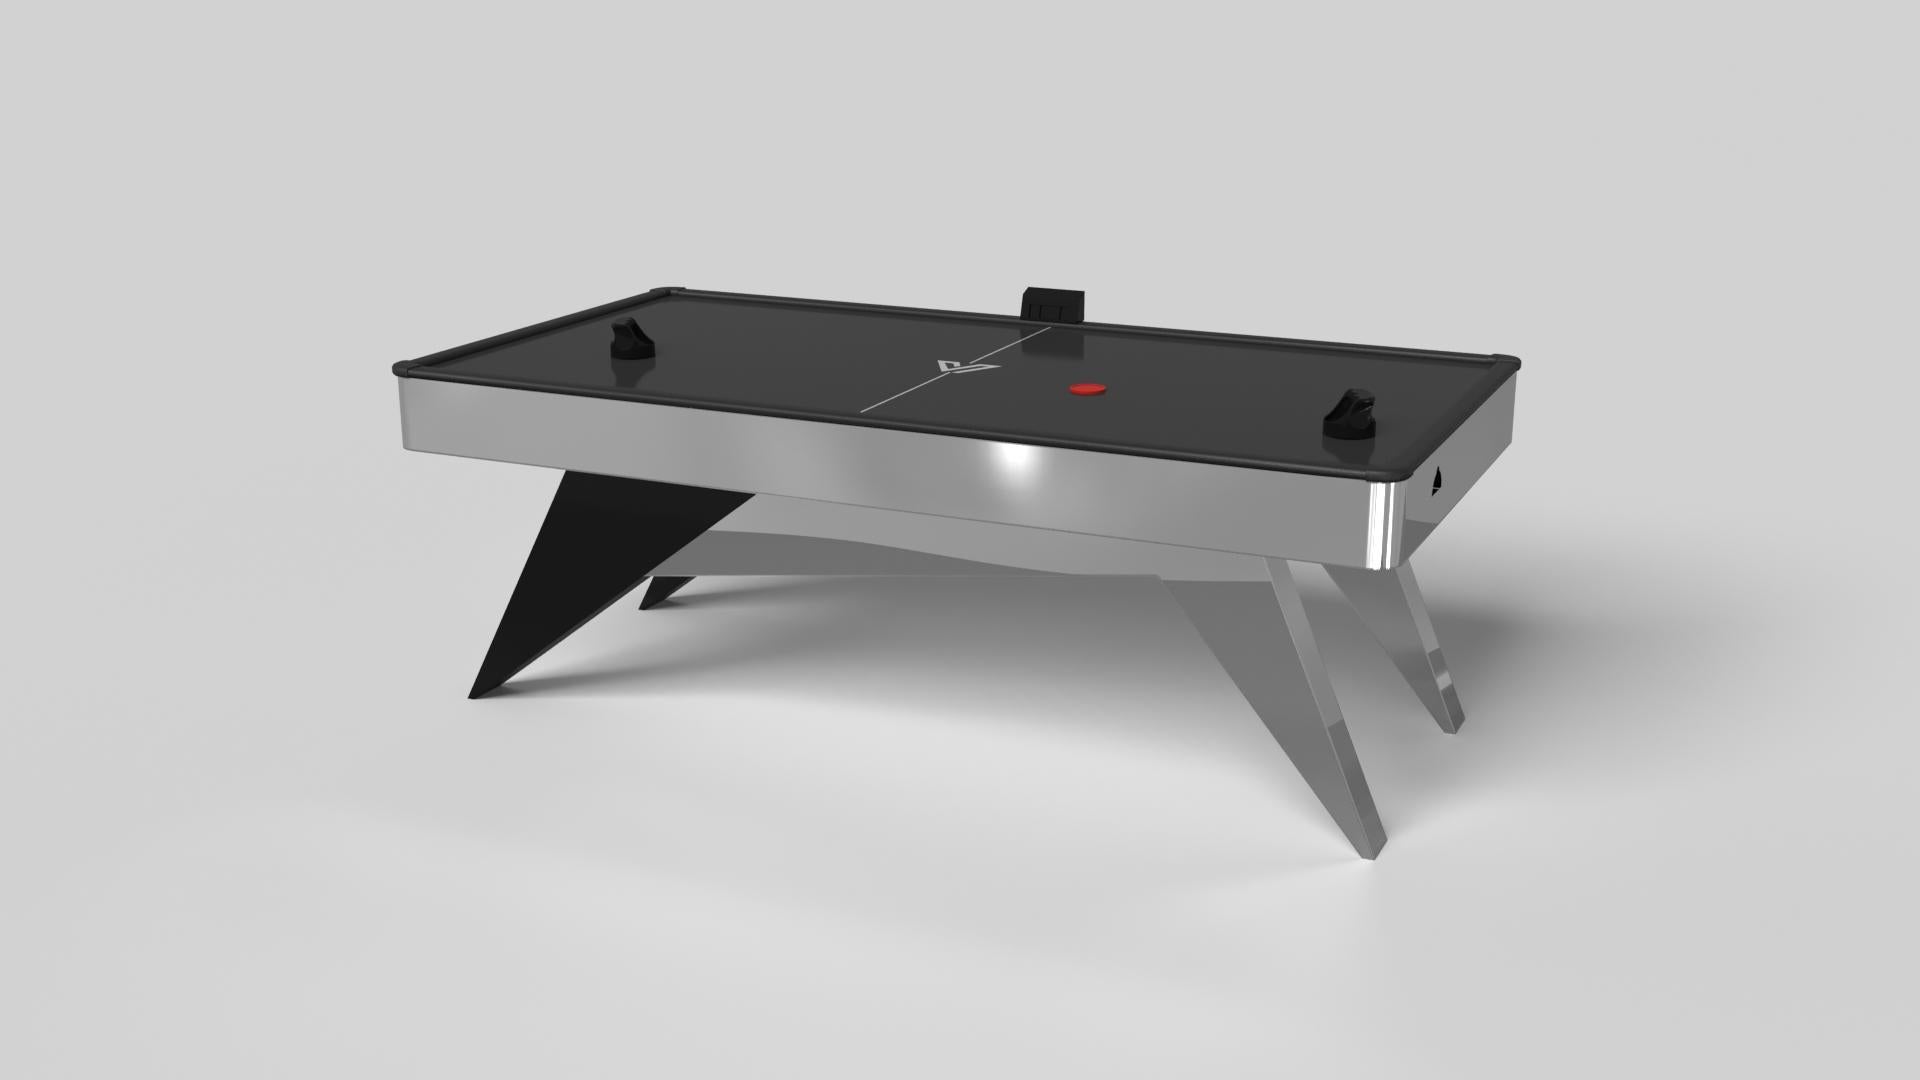 Simple yet sophisticated, the Mantis air hockey table puts a fresh, modern spin on a classic four-legged design. Sharp angles and tapered legs provide sleek stability.

Size:

88”X45”X31”